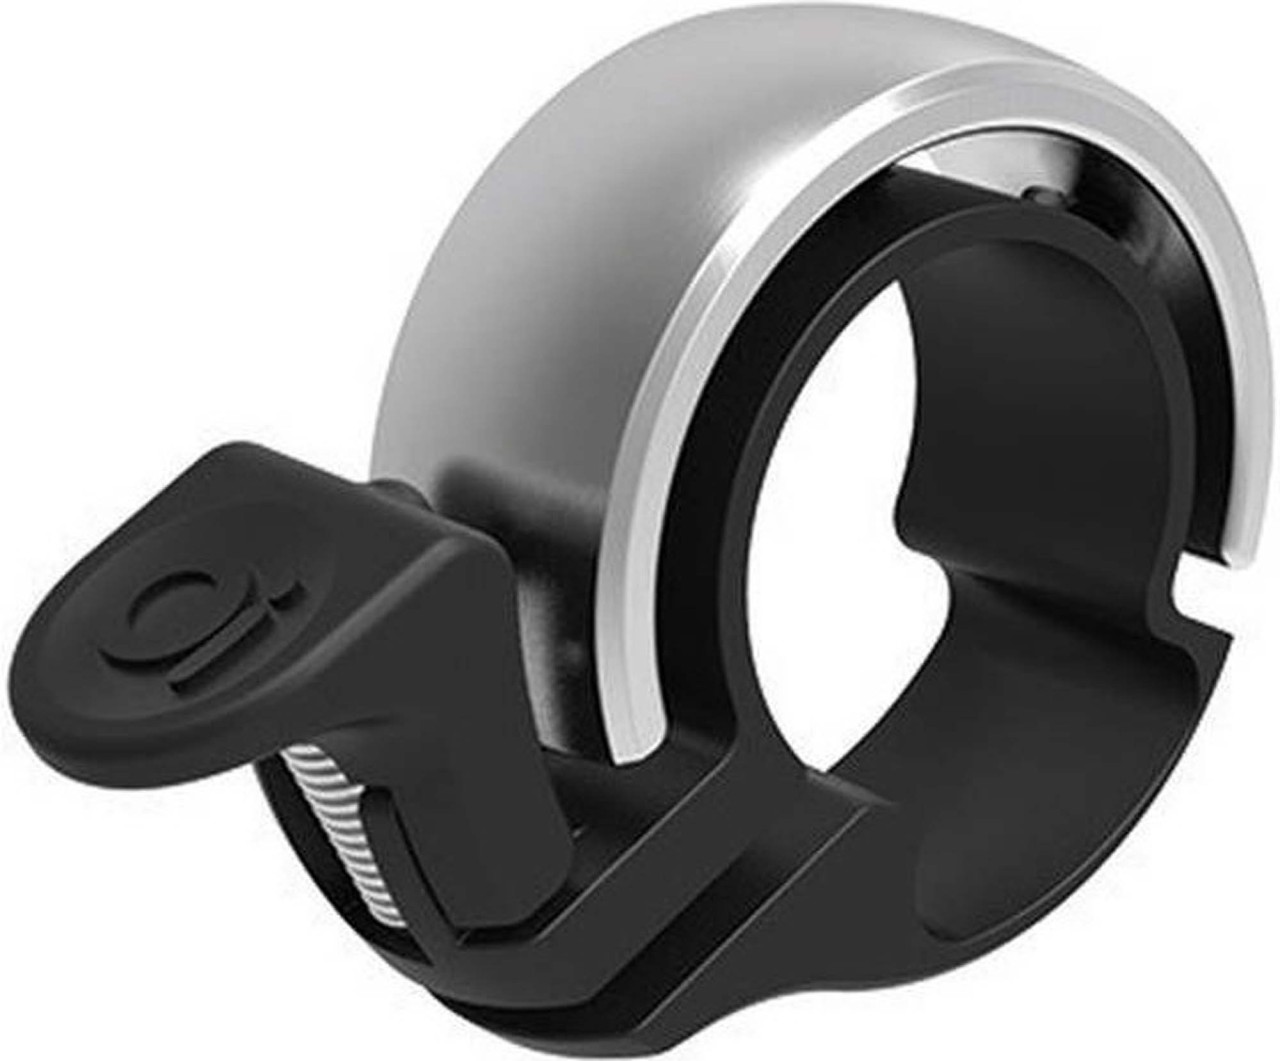 Knog bell Oi small silver